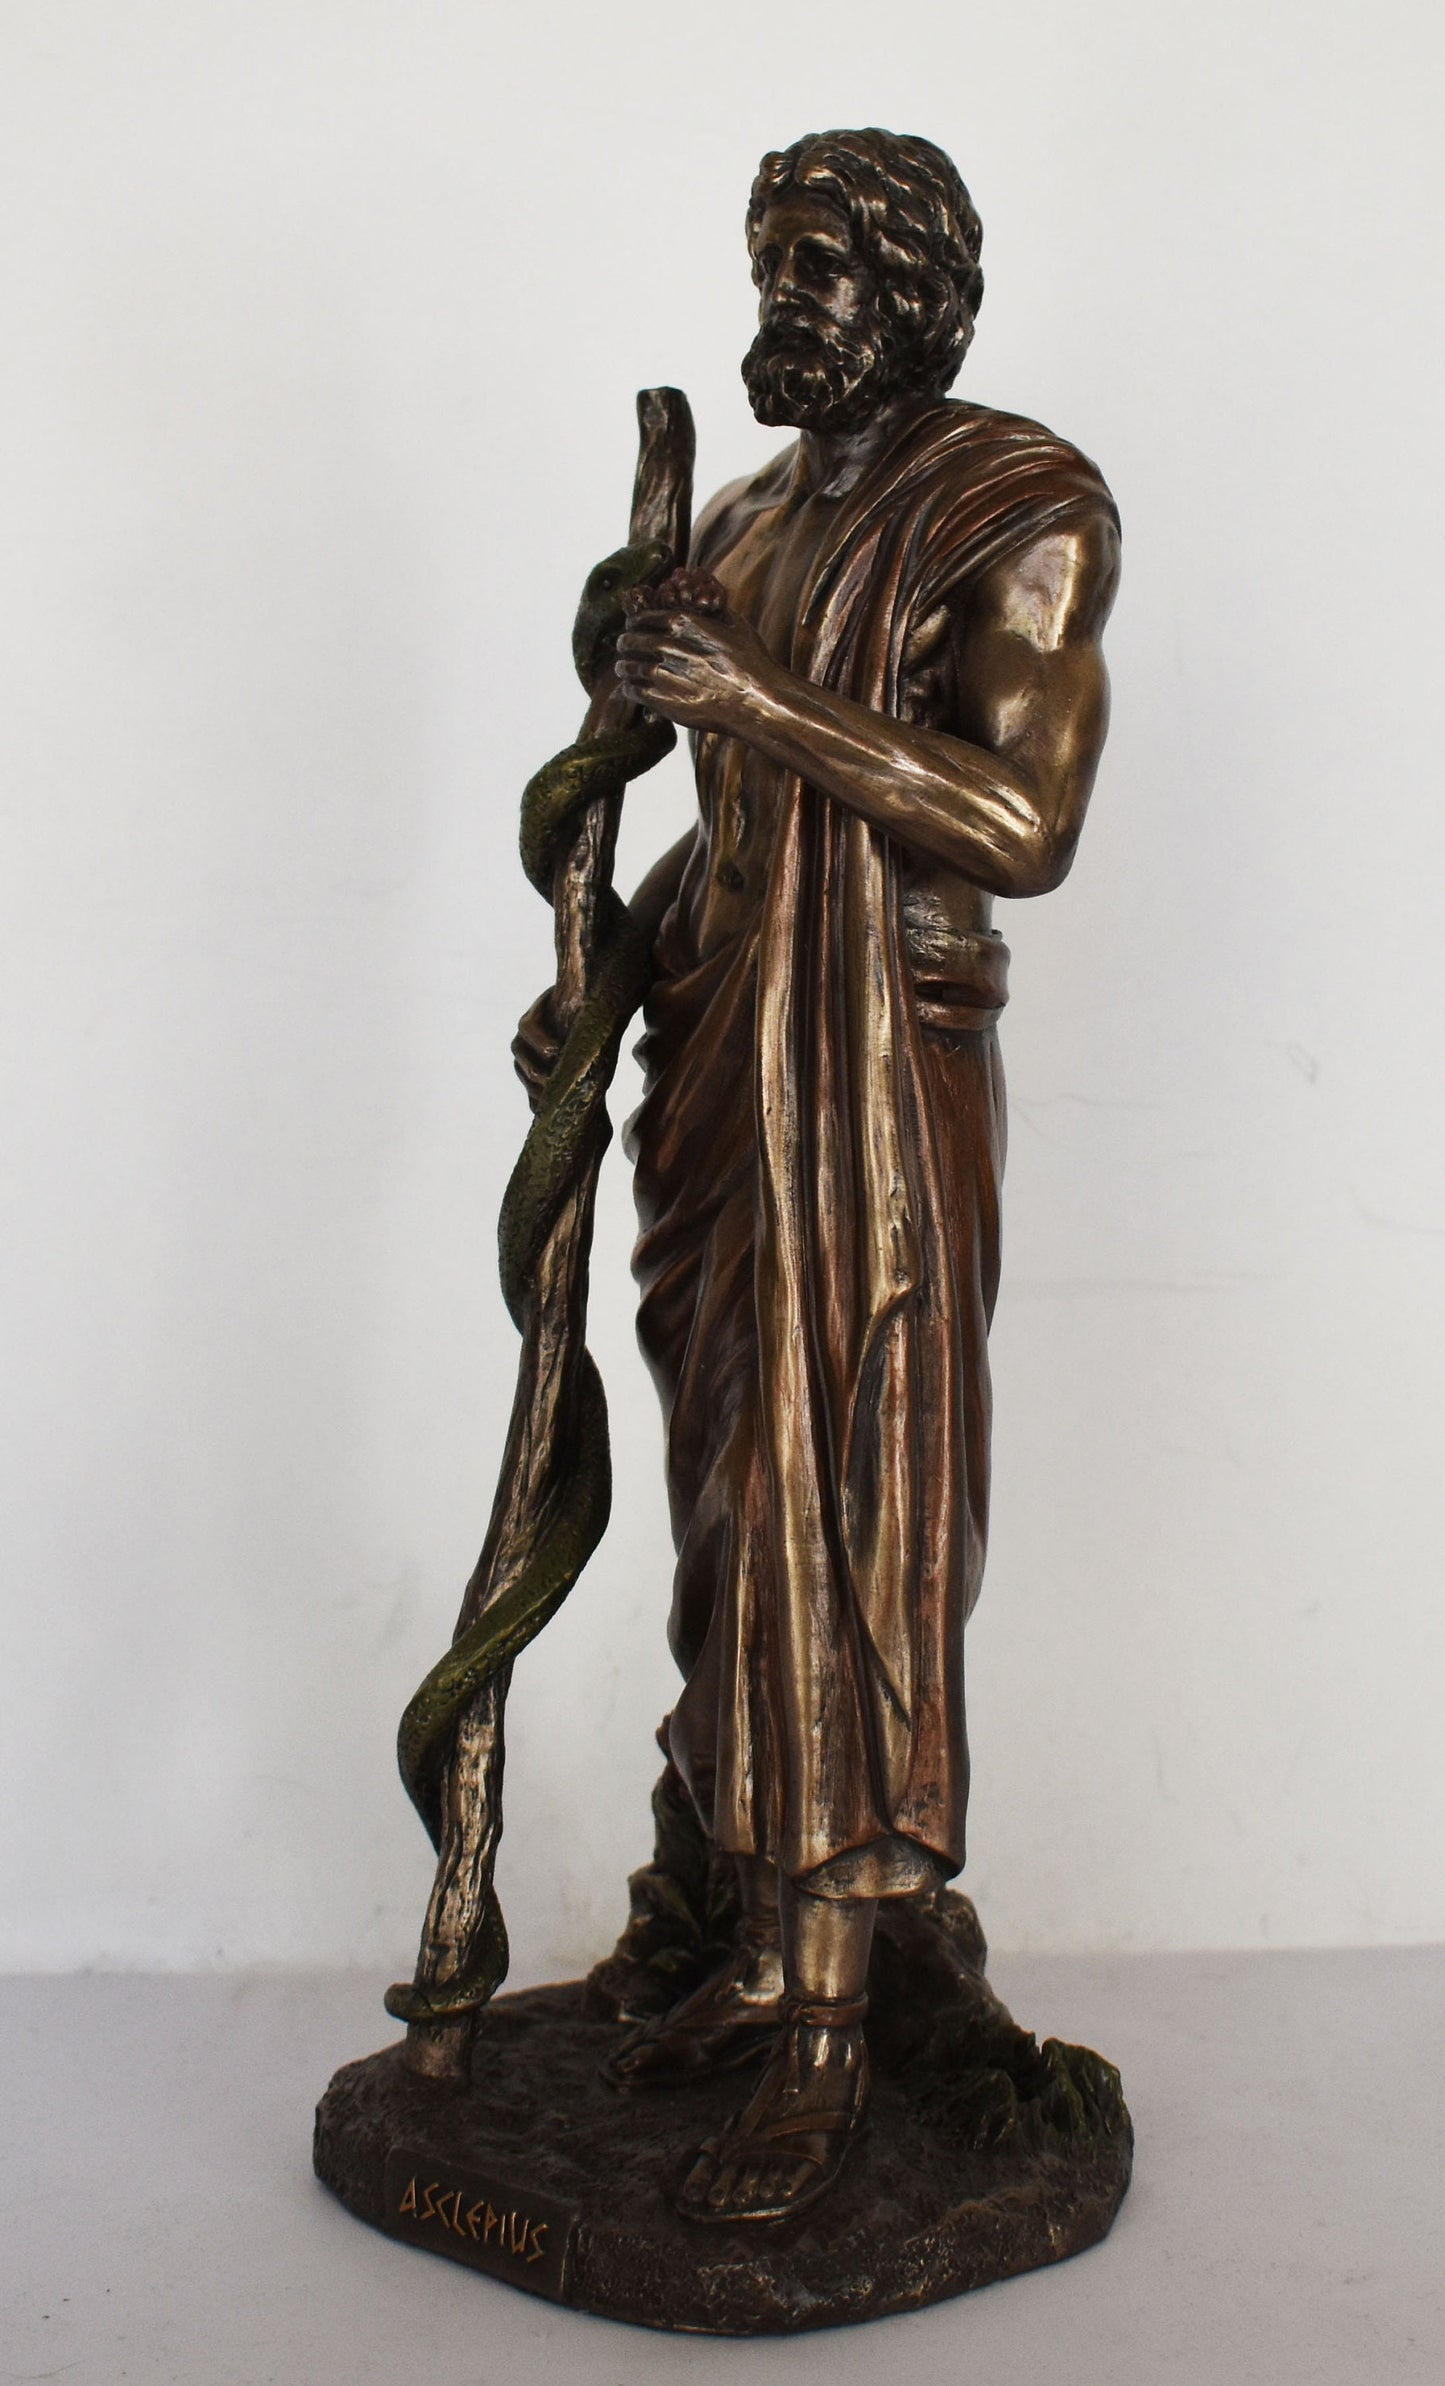 Asclepius -  Ancient Greek Hero - God of Medicine and Doctors - Represents the Healing Aspect of the Medical Arts - Cold Cast Bronze Resin